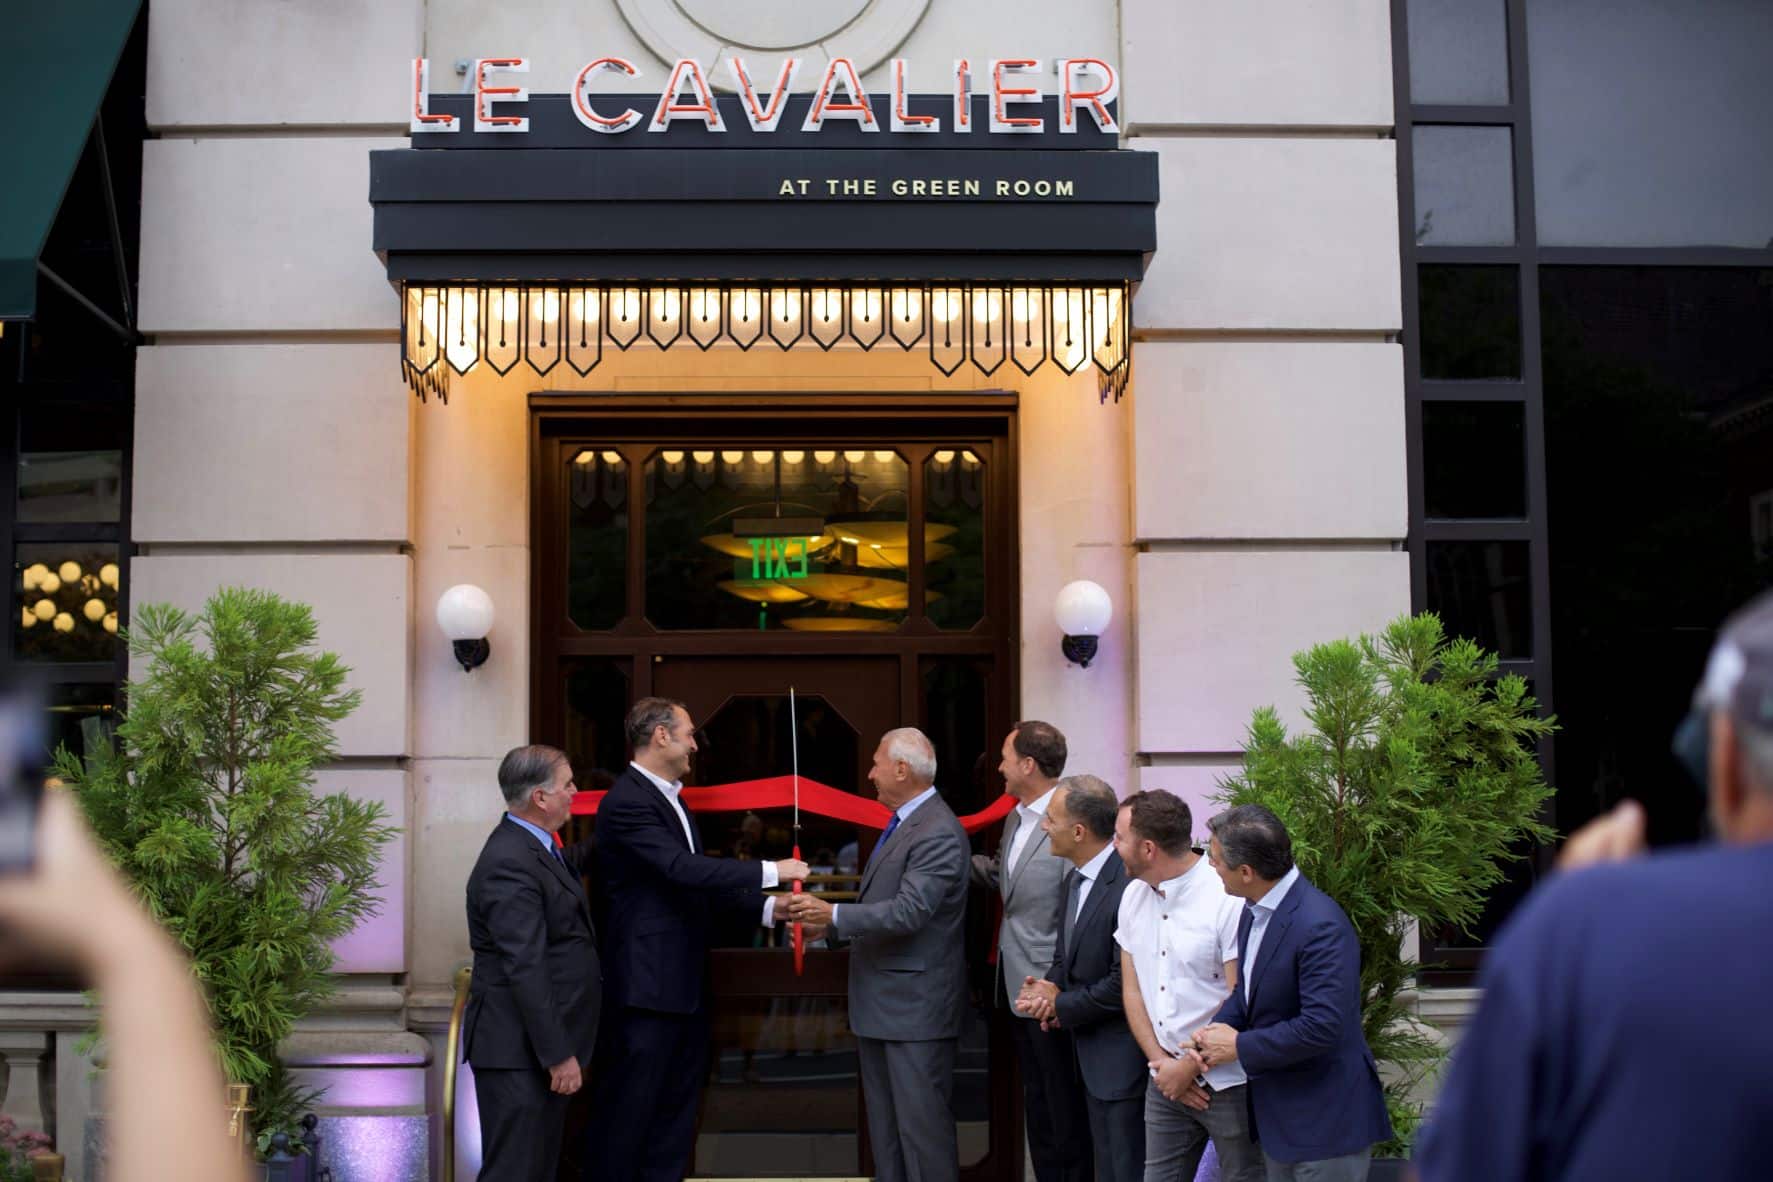 Le Cavalier Celebrates Grand Opening at the HOTEL DU PONT